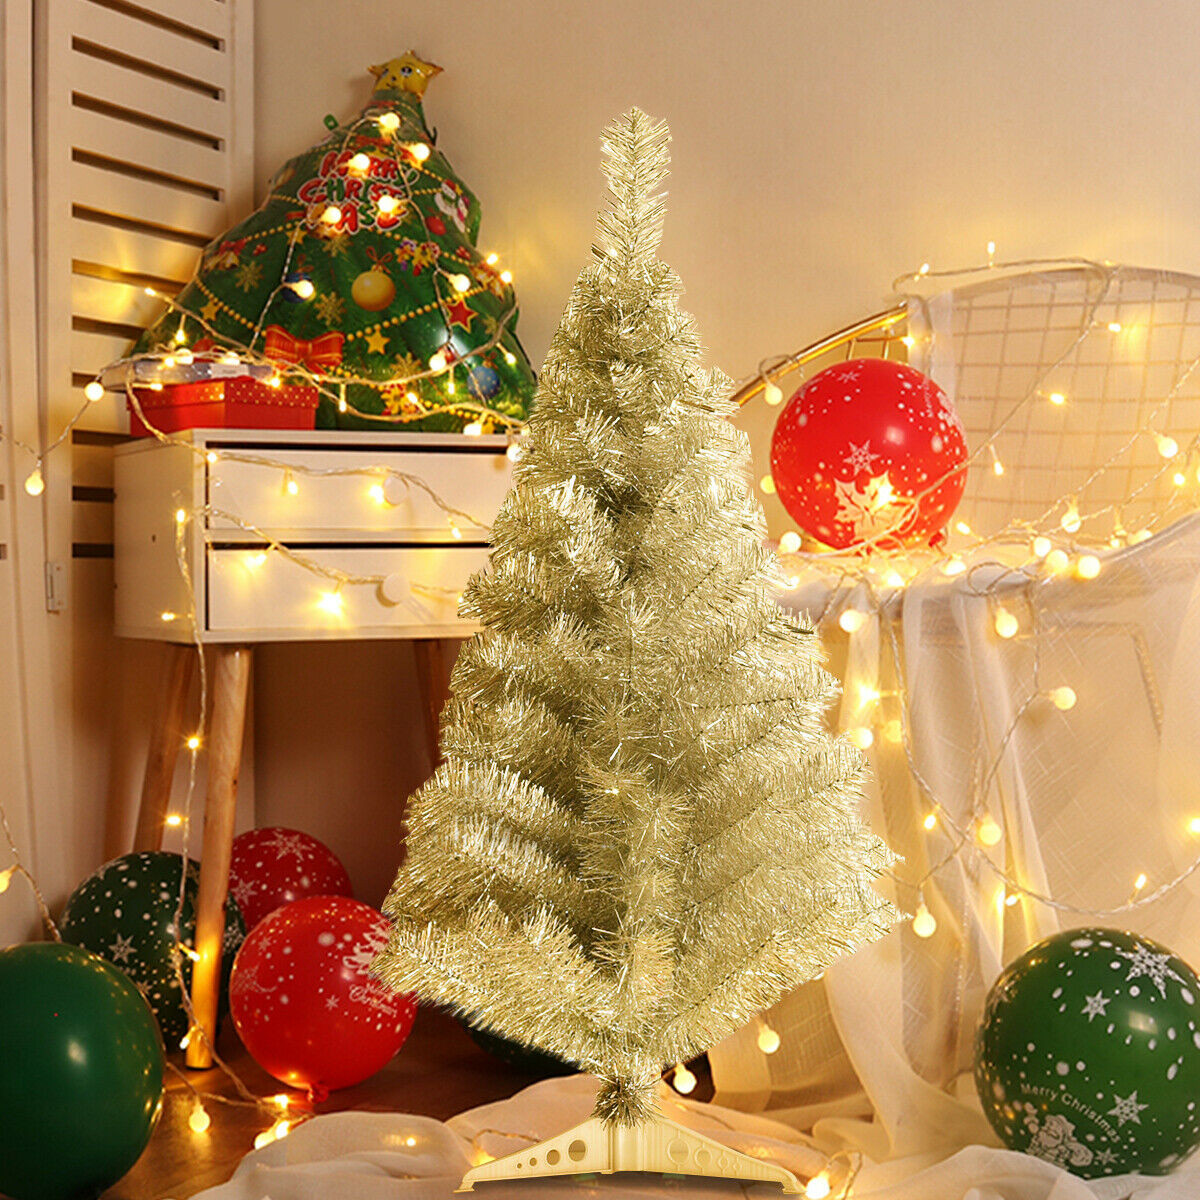 3 Ft Silver Tinsel Christmas Tree With Plastic Stand